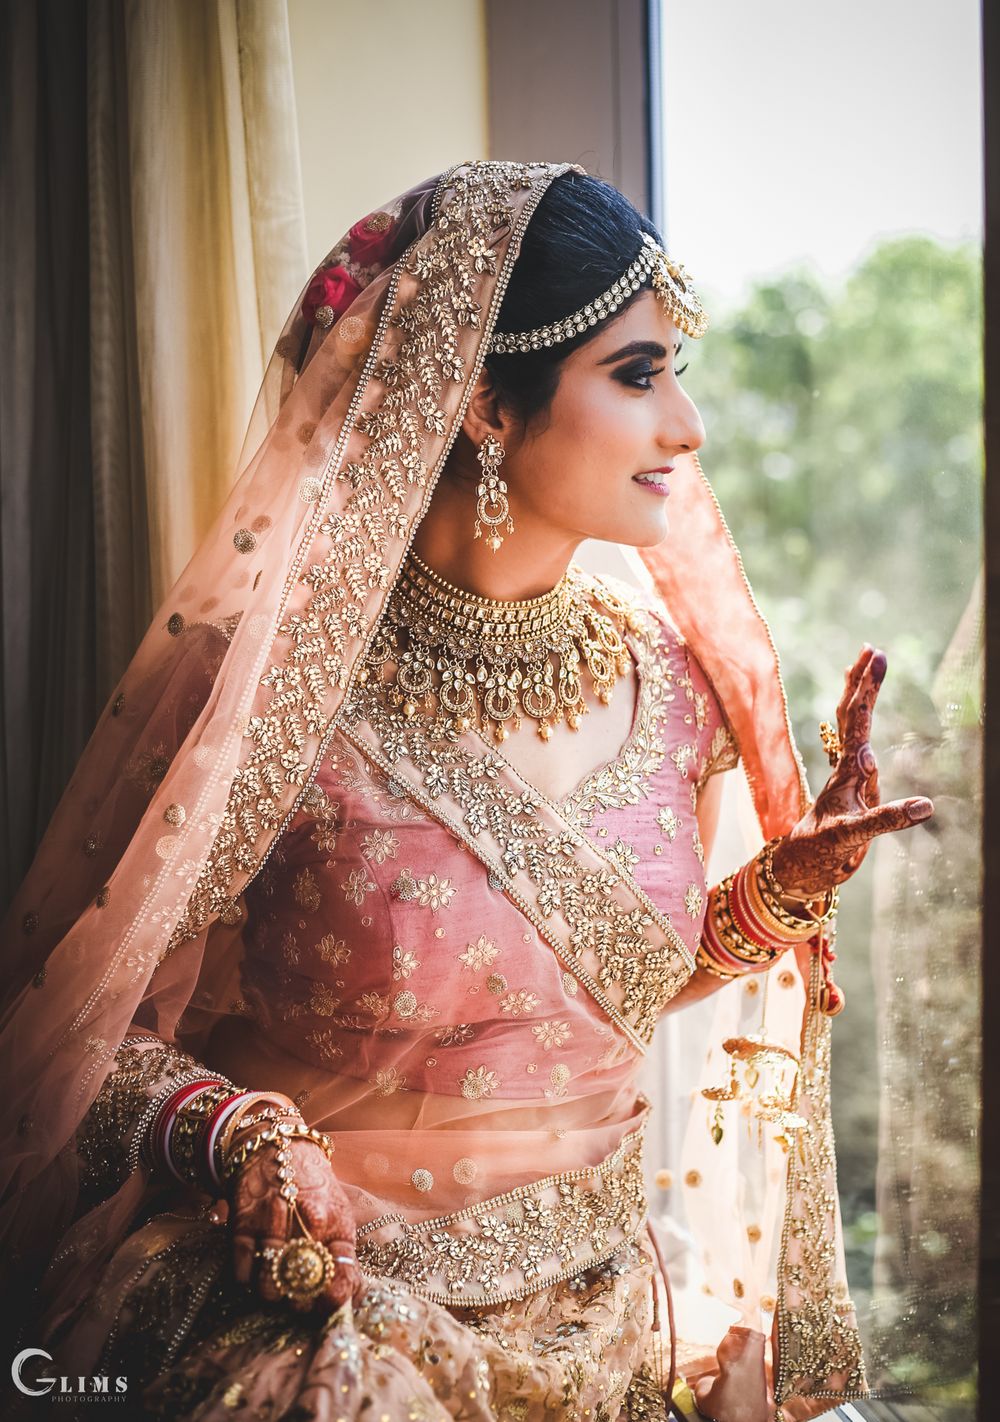 Photo of Bride by the window in a dusty peach lehenga